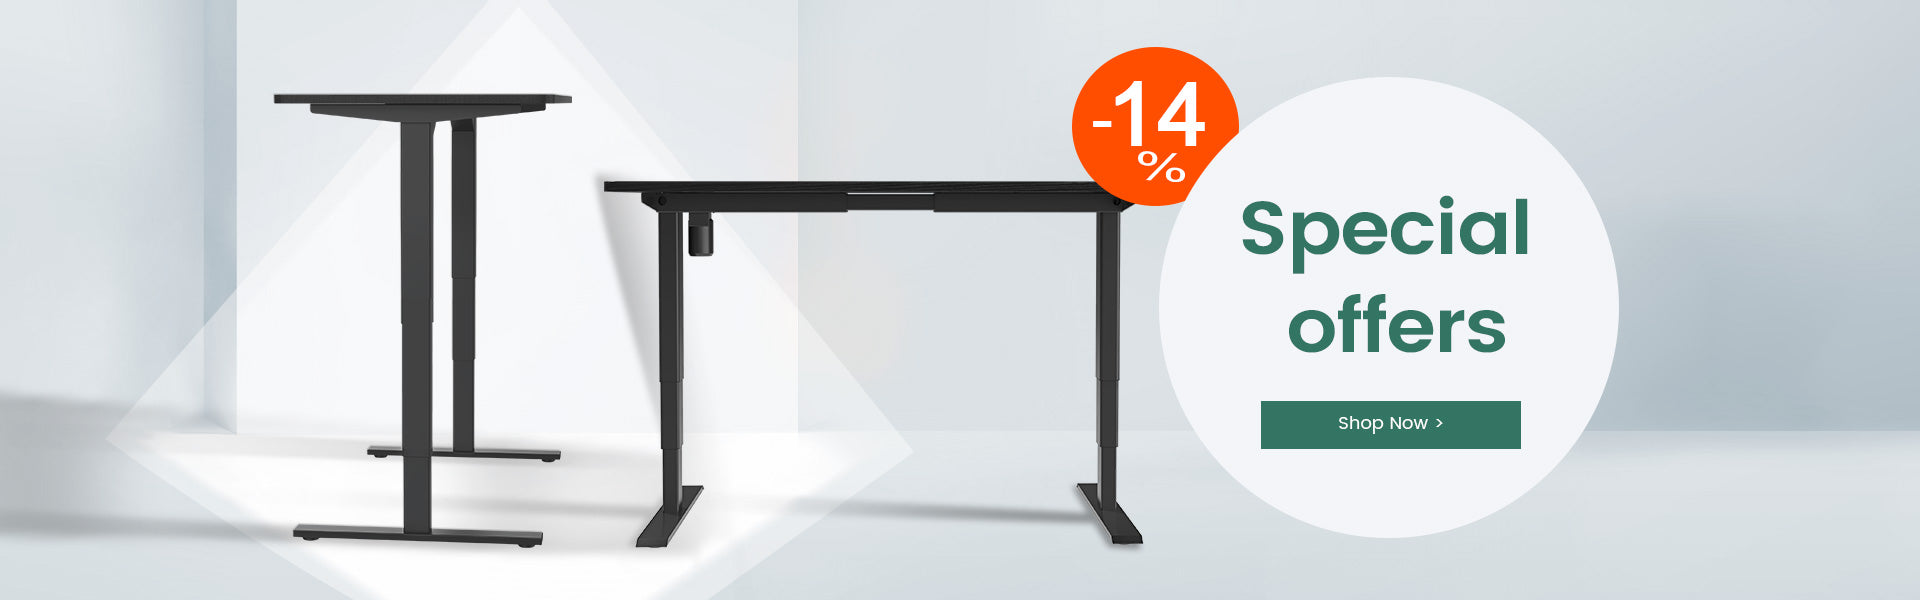 Maidesite T1 Pro - Electric Height Adjustable Standing Desk Frame